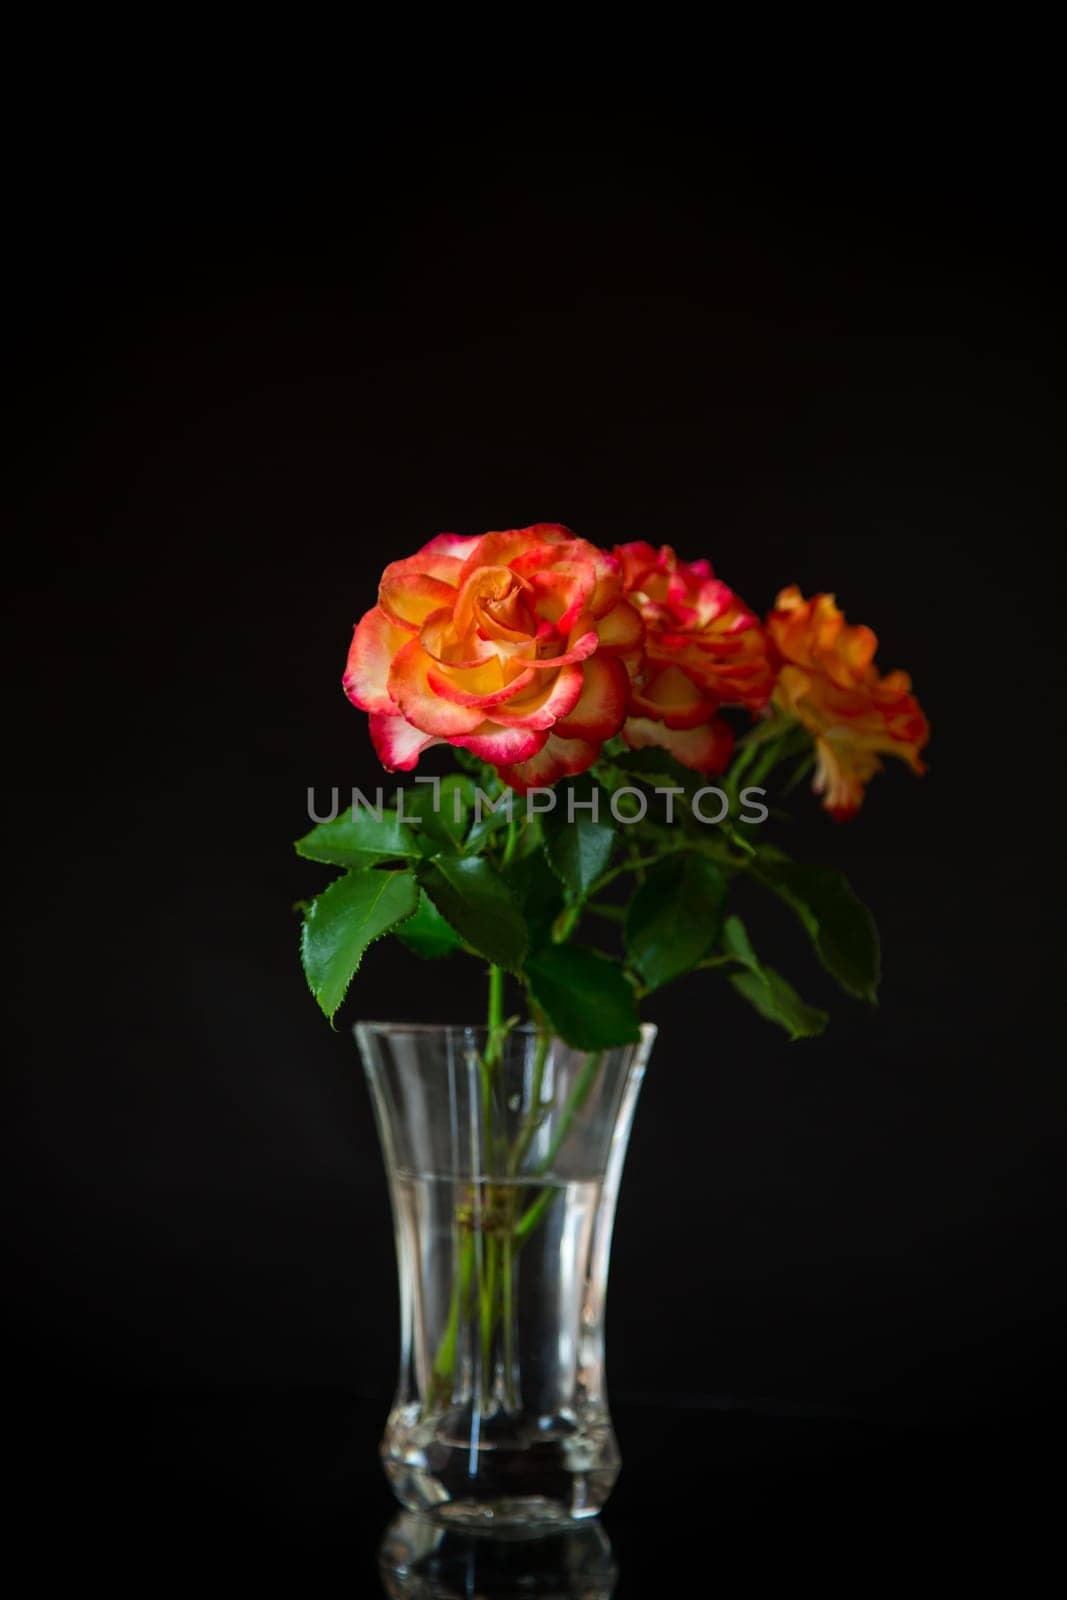 Flowers of beautiful blooming red rose isolated on black background.